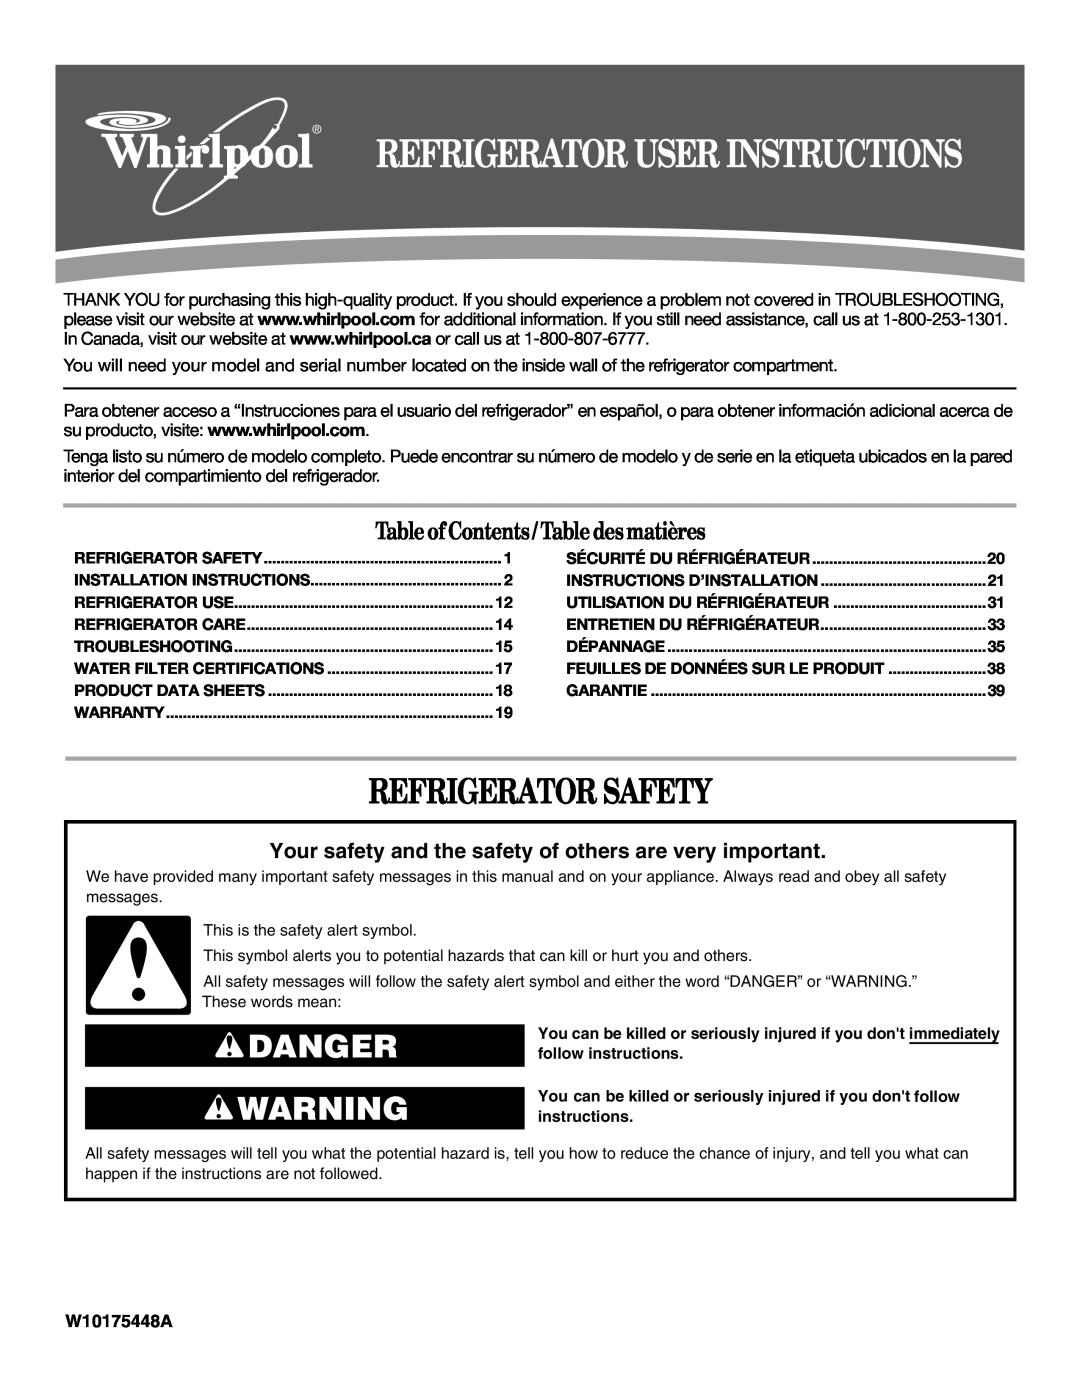 Whirlpool W10175448A installation instructions Refrigerator Safety, Danger, Table of Contents / Table desmatières 